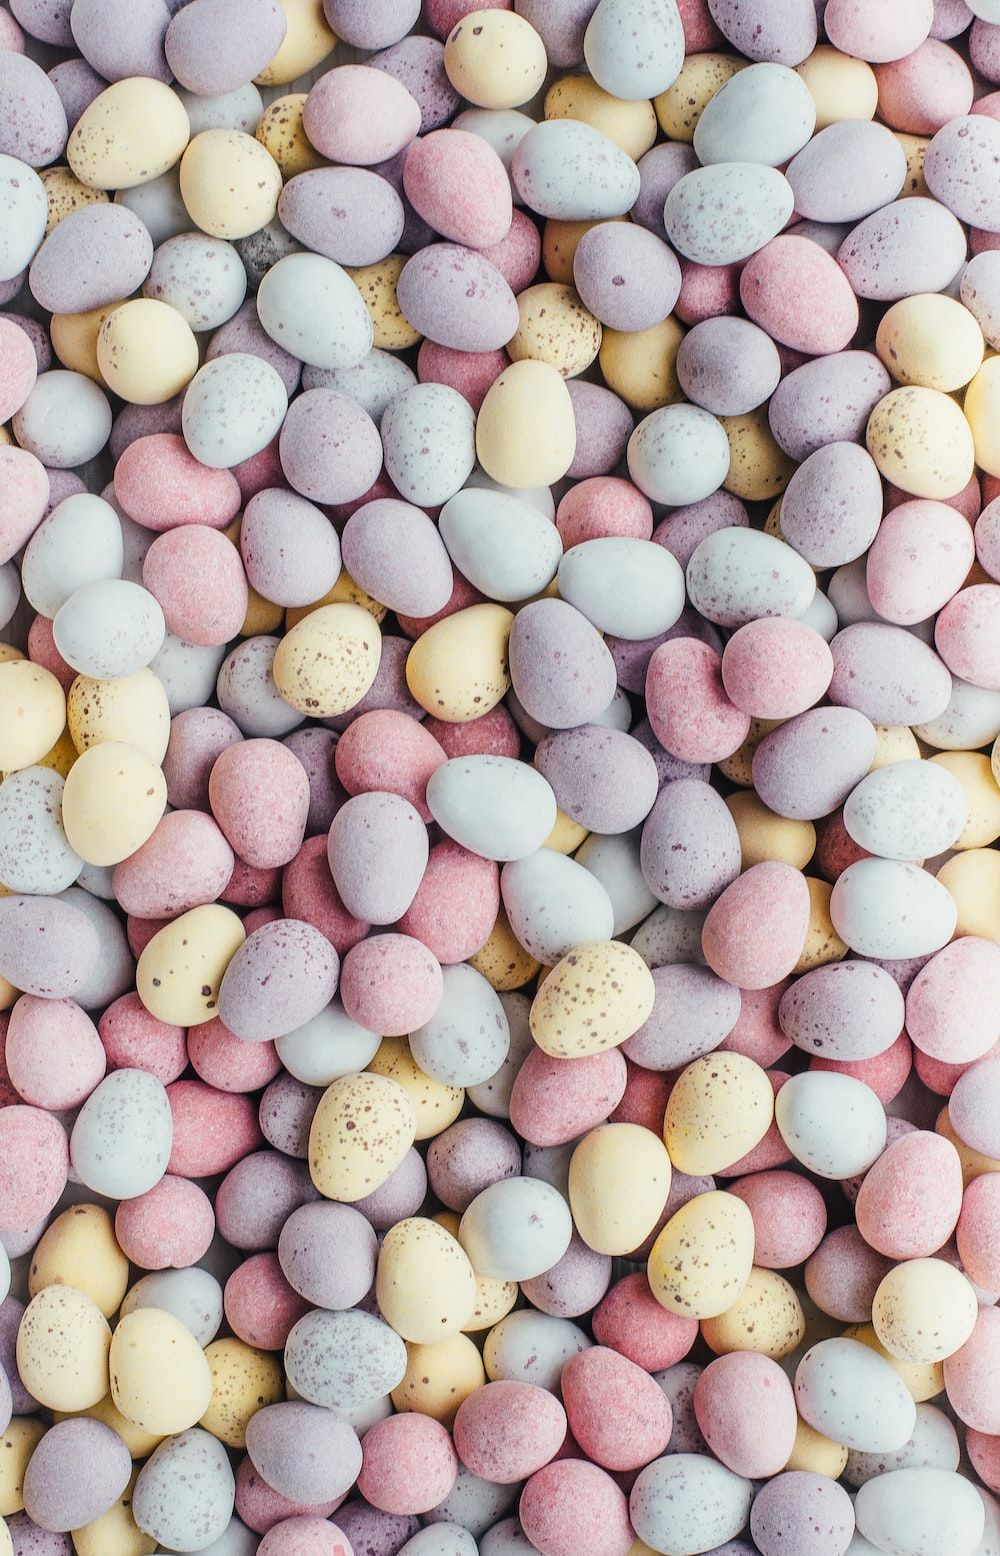 A pile of candy eggs in pastel colors. - Food, Easter, egg, foodie